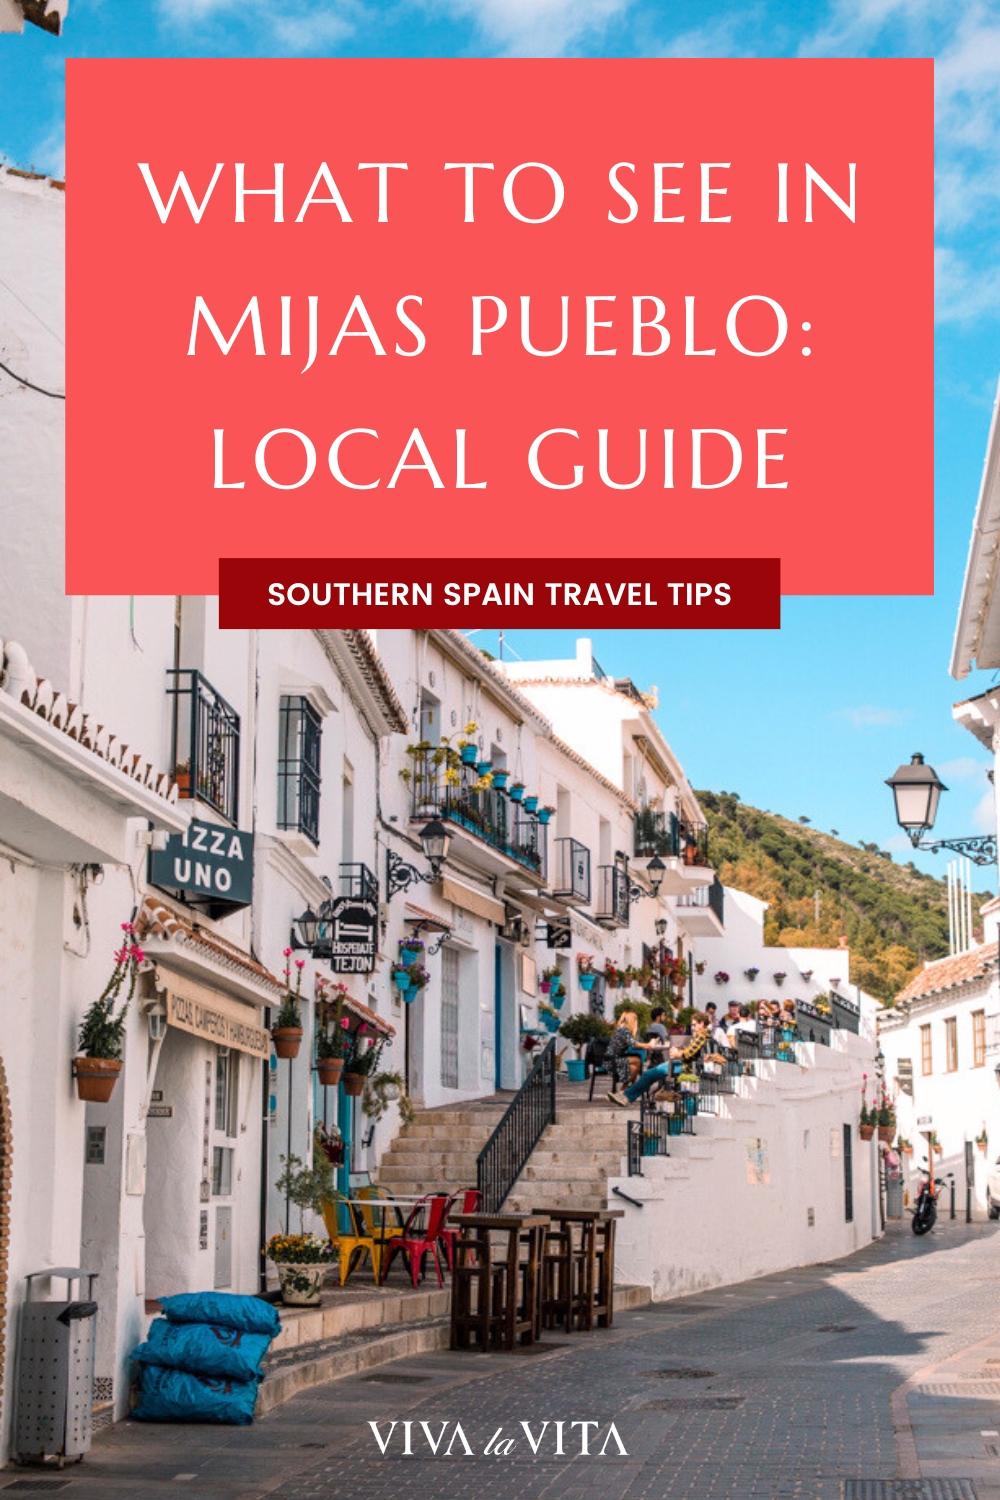 pinterest image showing a street in the village of Mijas pueblo, with a headline reading: what to see in Mijas pueblo: local guide, southern spain travel tips